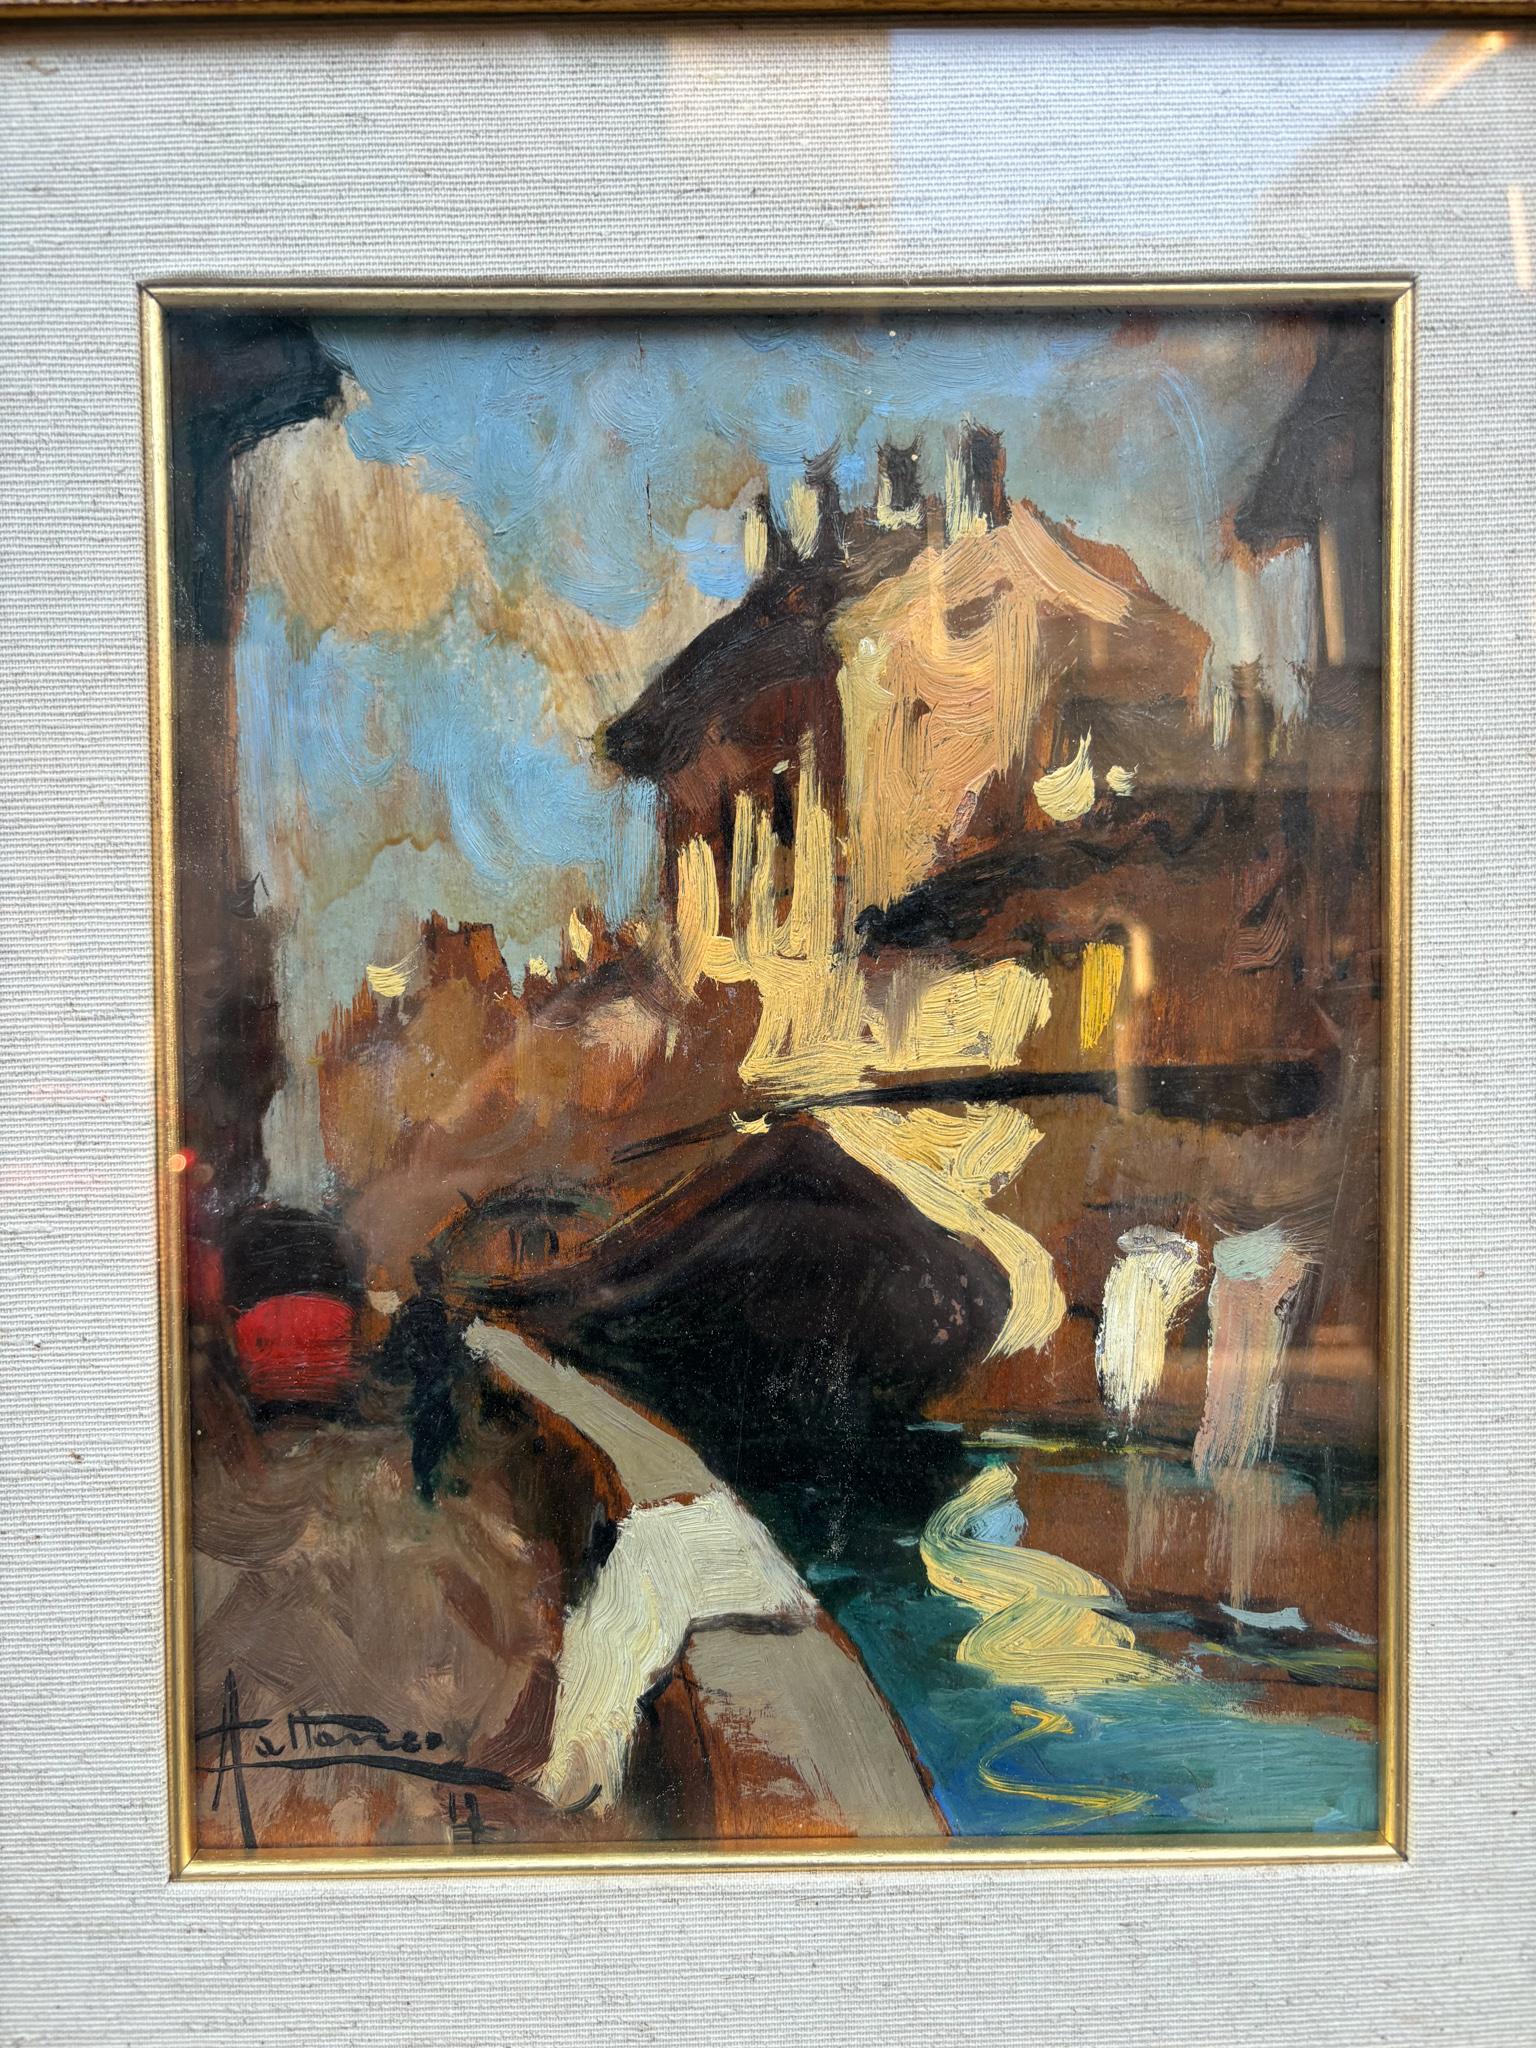 Oil painting depicting a glimpse of the city of Milan, created by Achille Cattaneo in the early 20th century.

Ø 43 cm h 49 cm

Achille Cattaneo (1872-1931) was an Italian painter, known for his urban views of Milan and Venice, as well as church